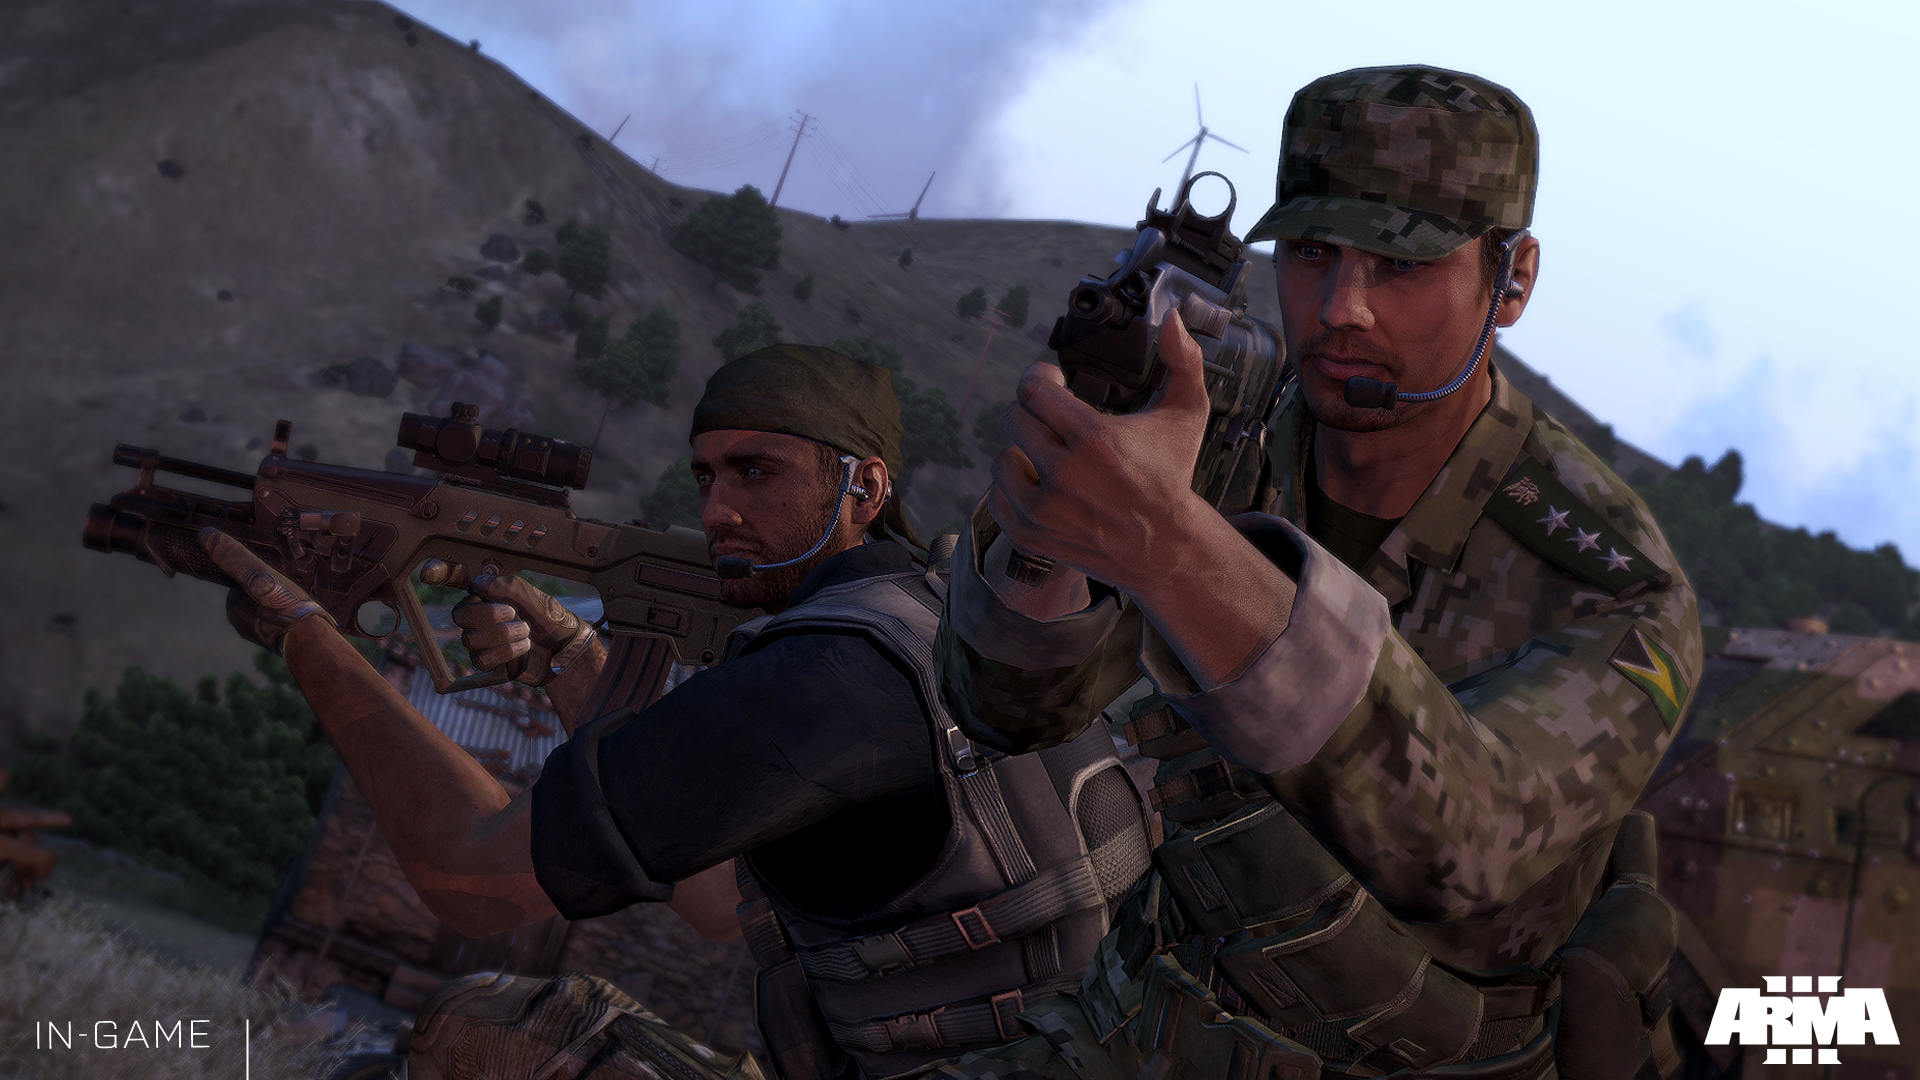 First campaign episode for Arma 3 available on October 31